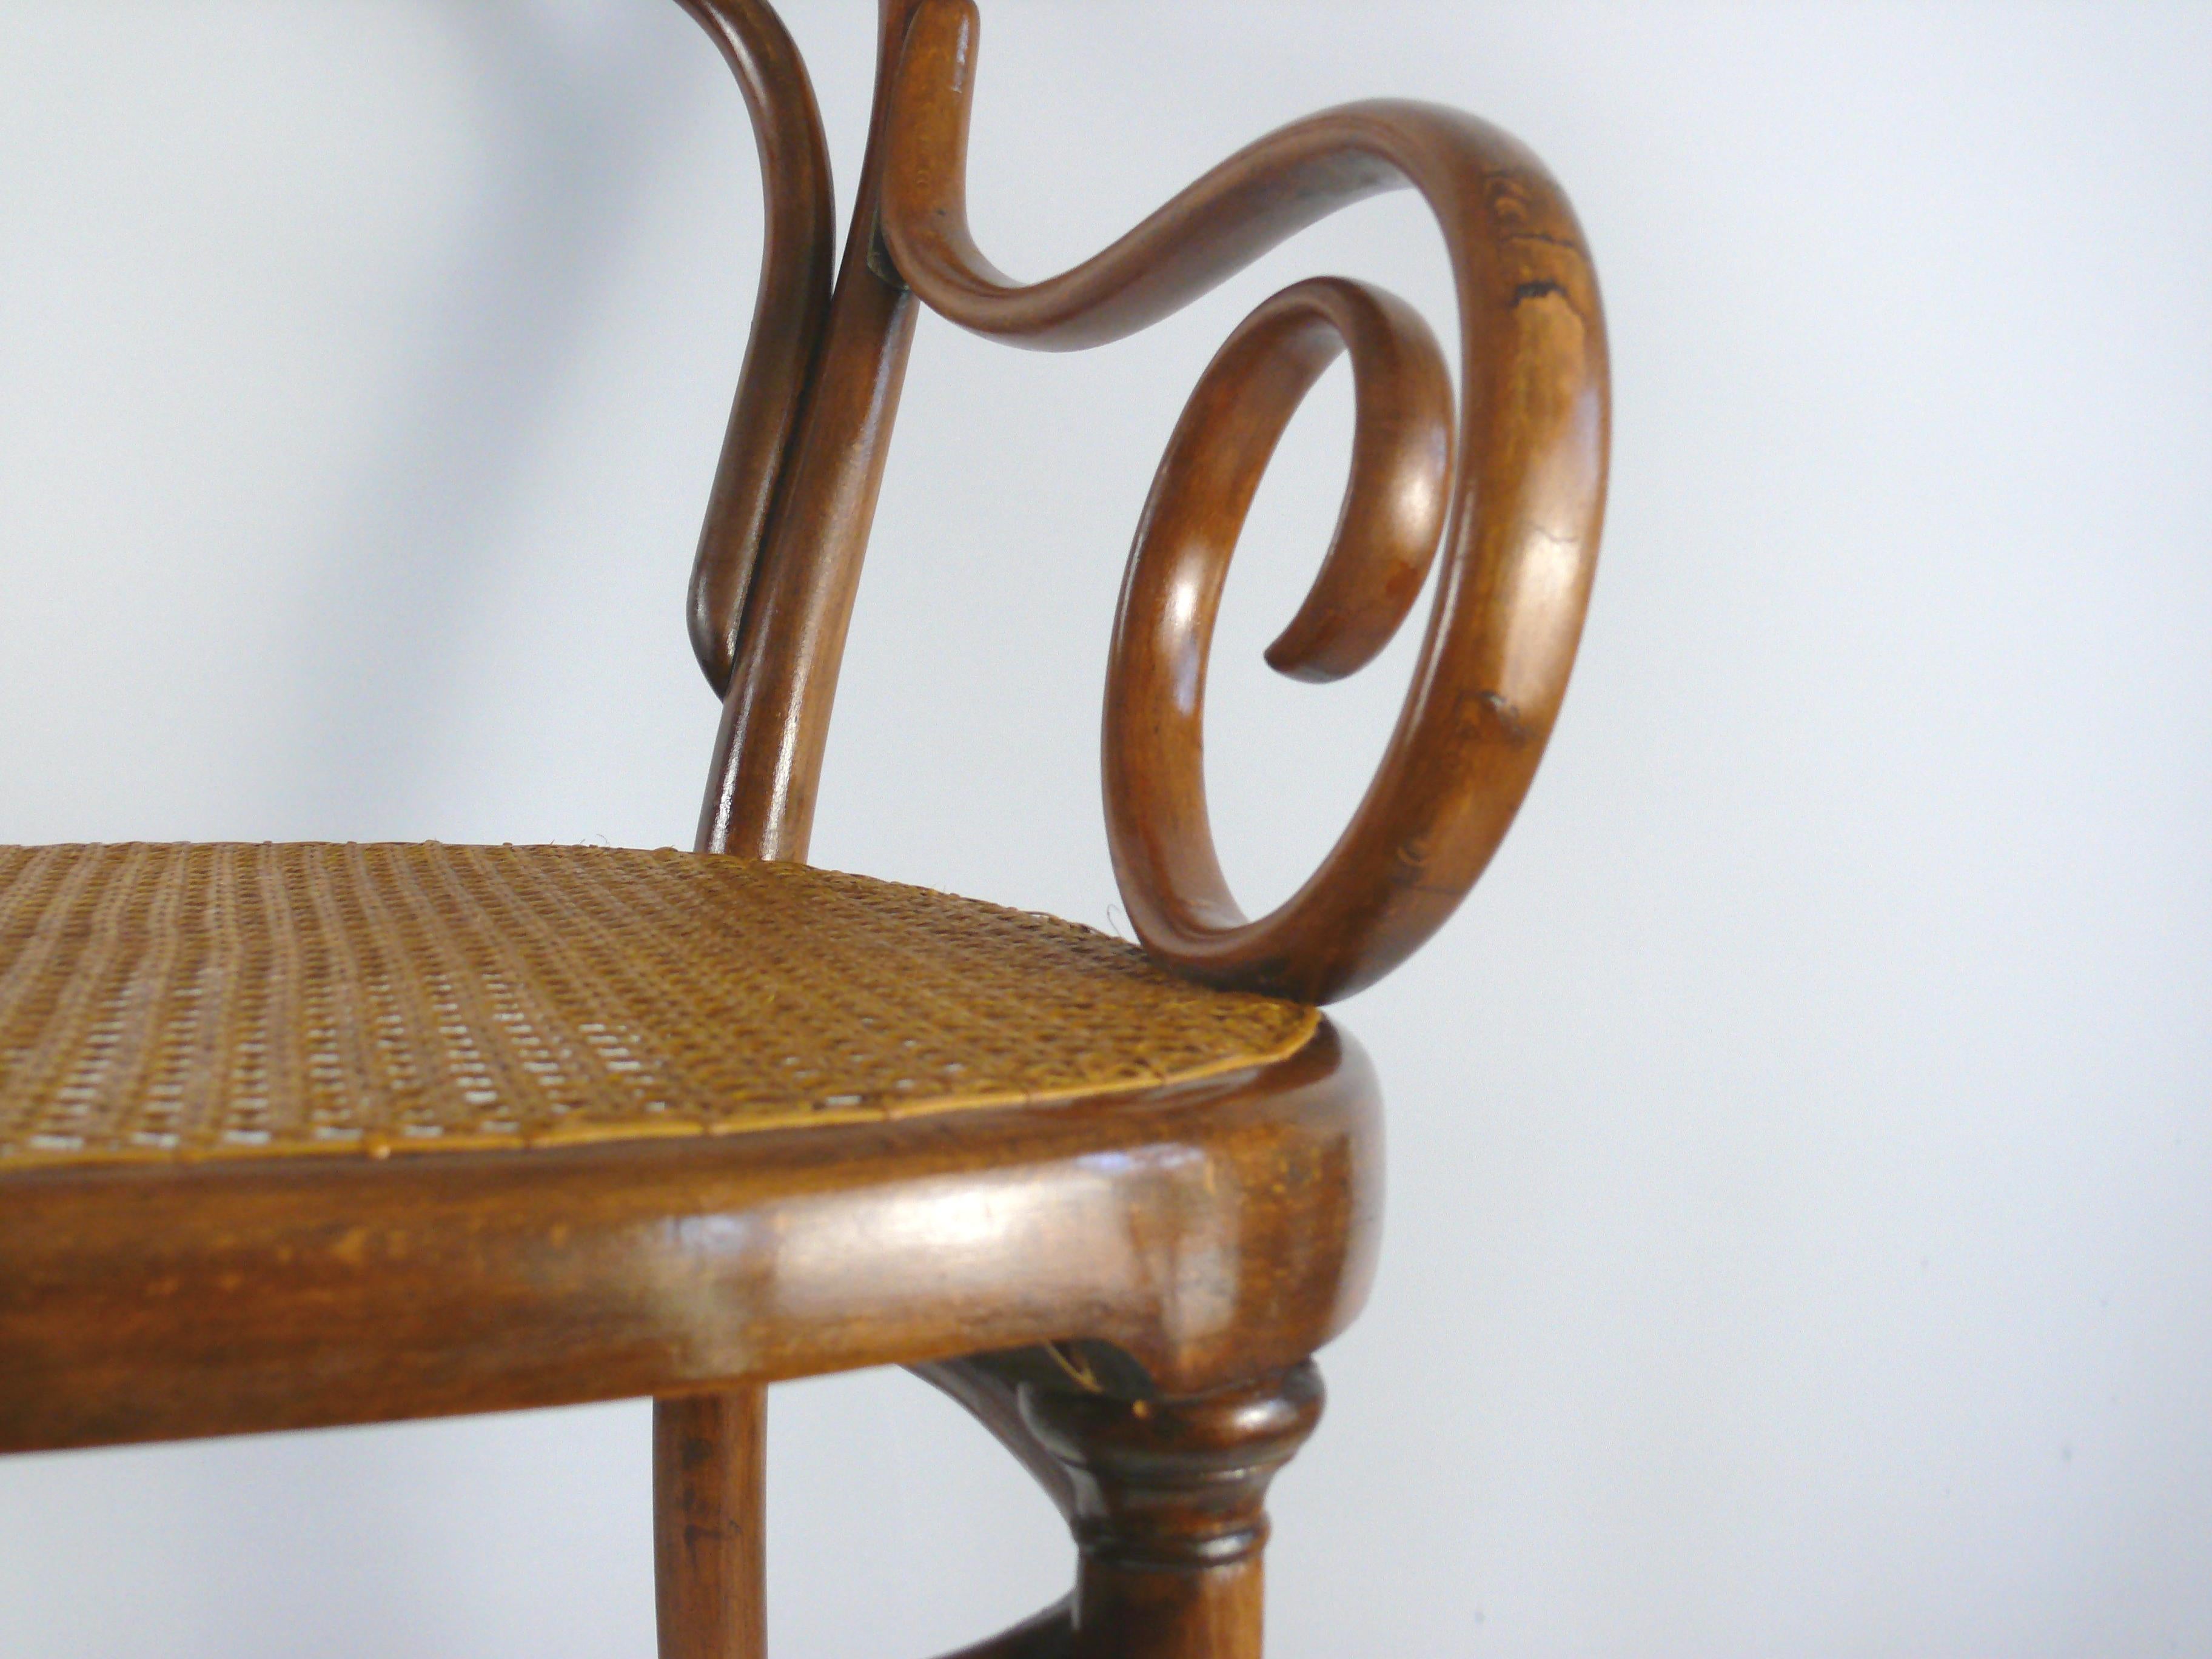 Rococo Revival Original Thonet Bentwood Fauteuil, 19th Century